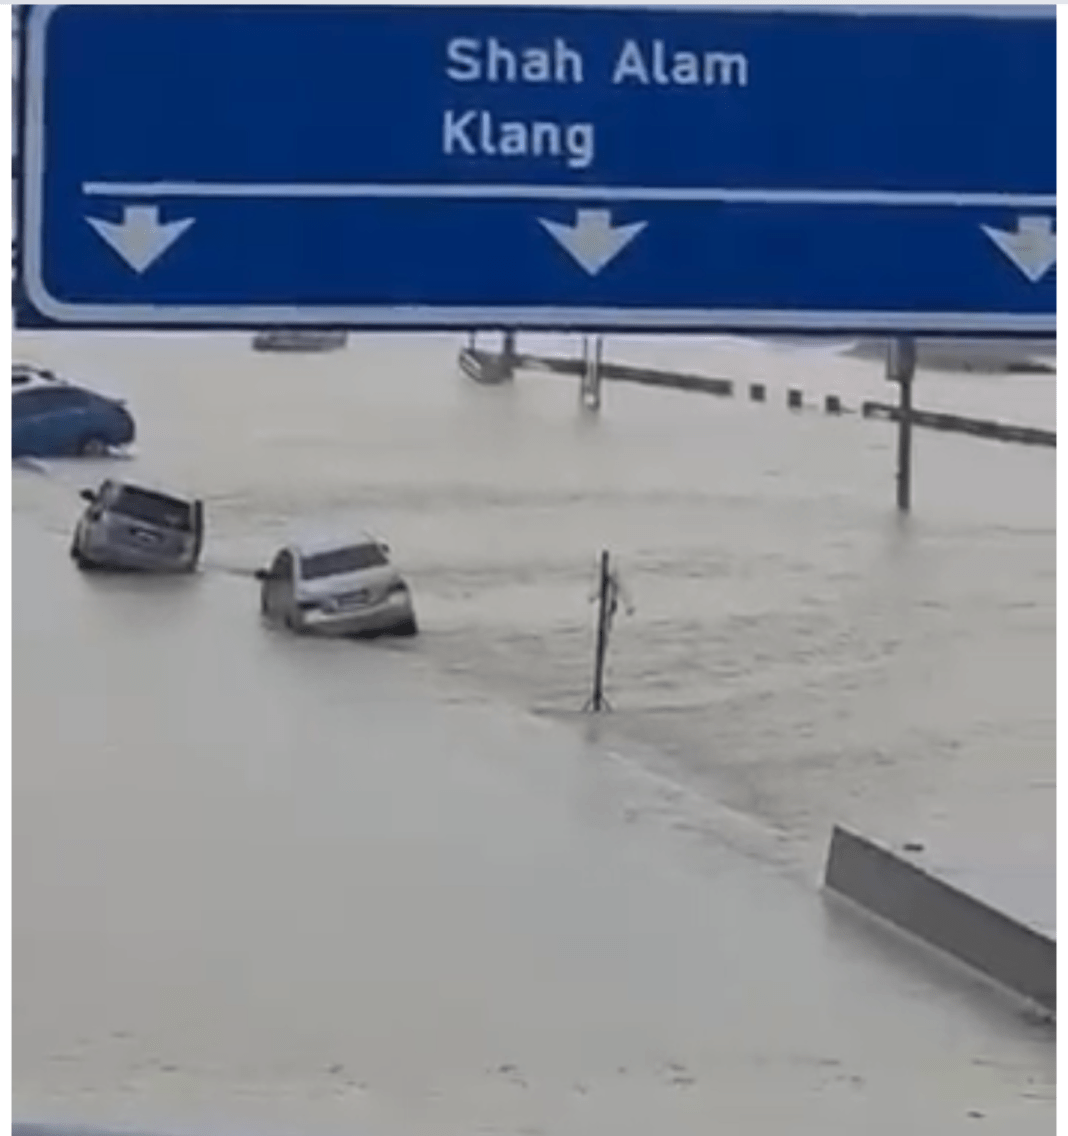 Plus Closes Entire Shah Alam Toll Due To Flash Flood  BusinessToday